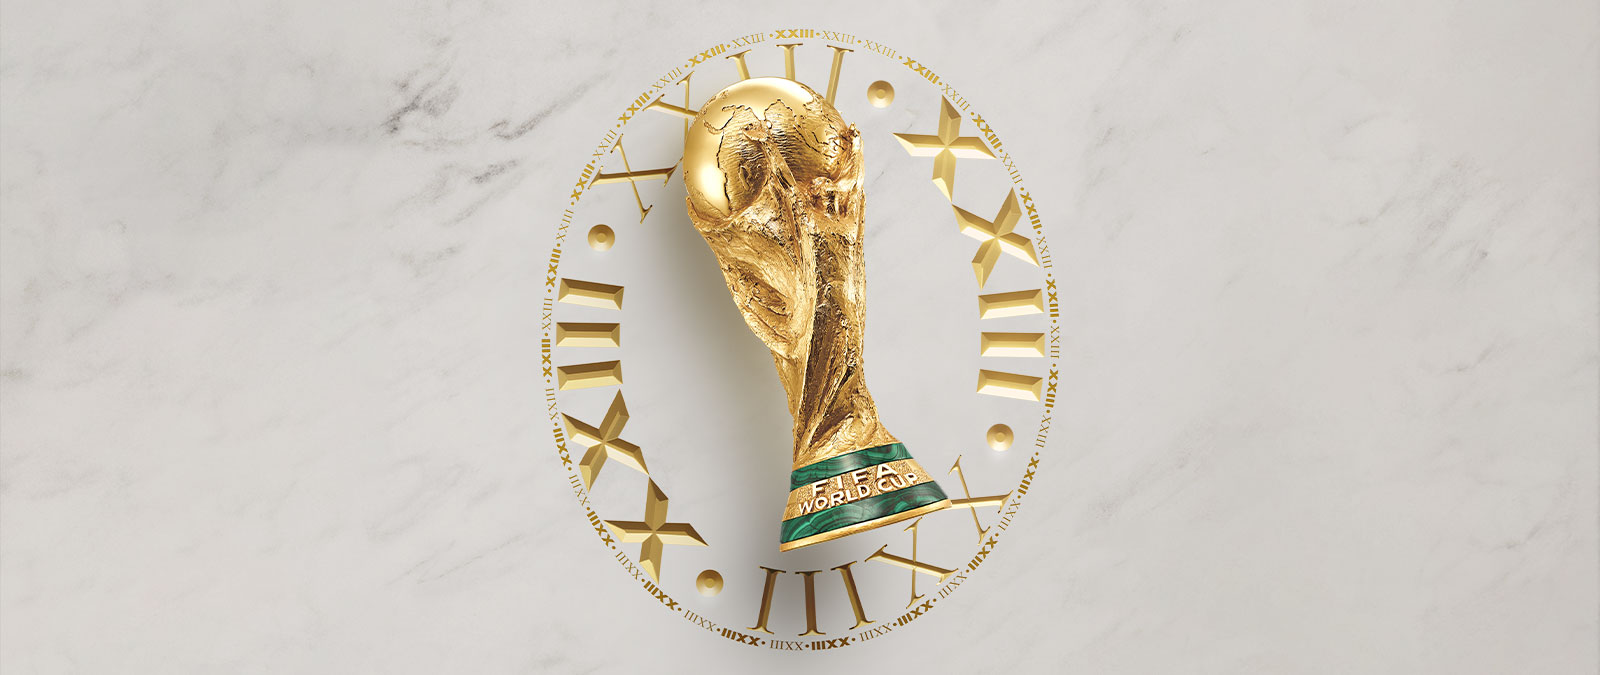 The FIFA World Cup trophy with gold embossed roman number numerals of the number 23 encircling it.